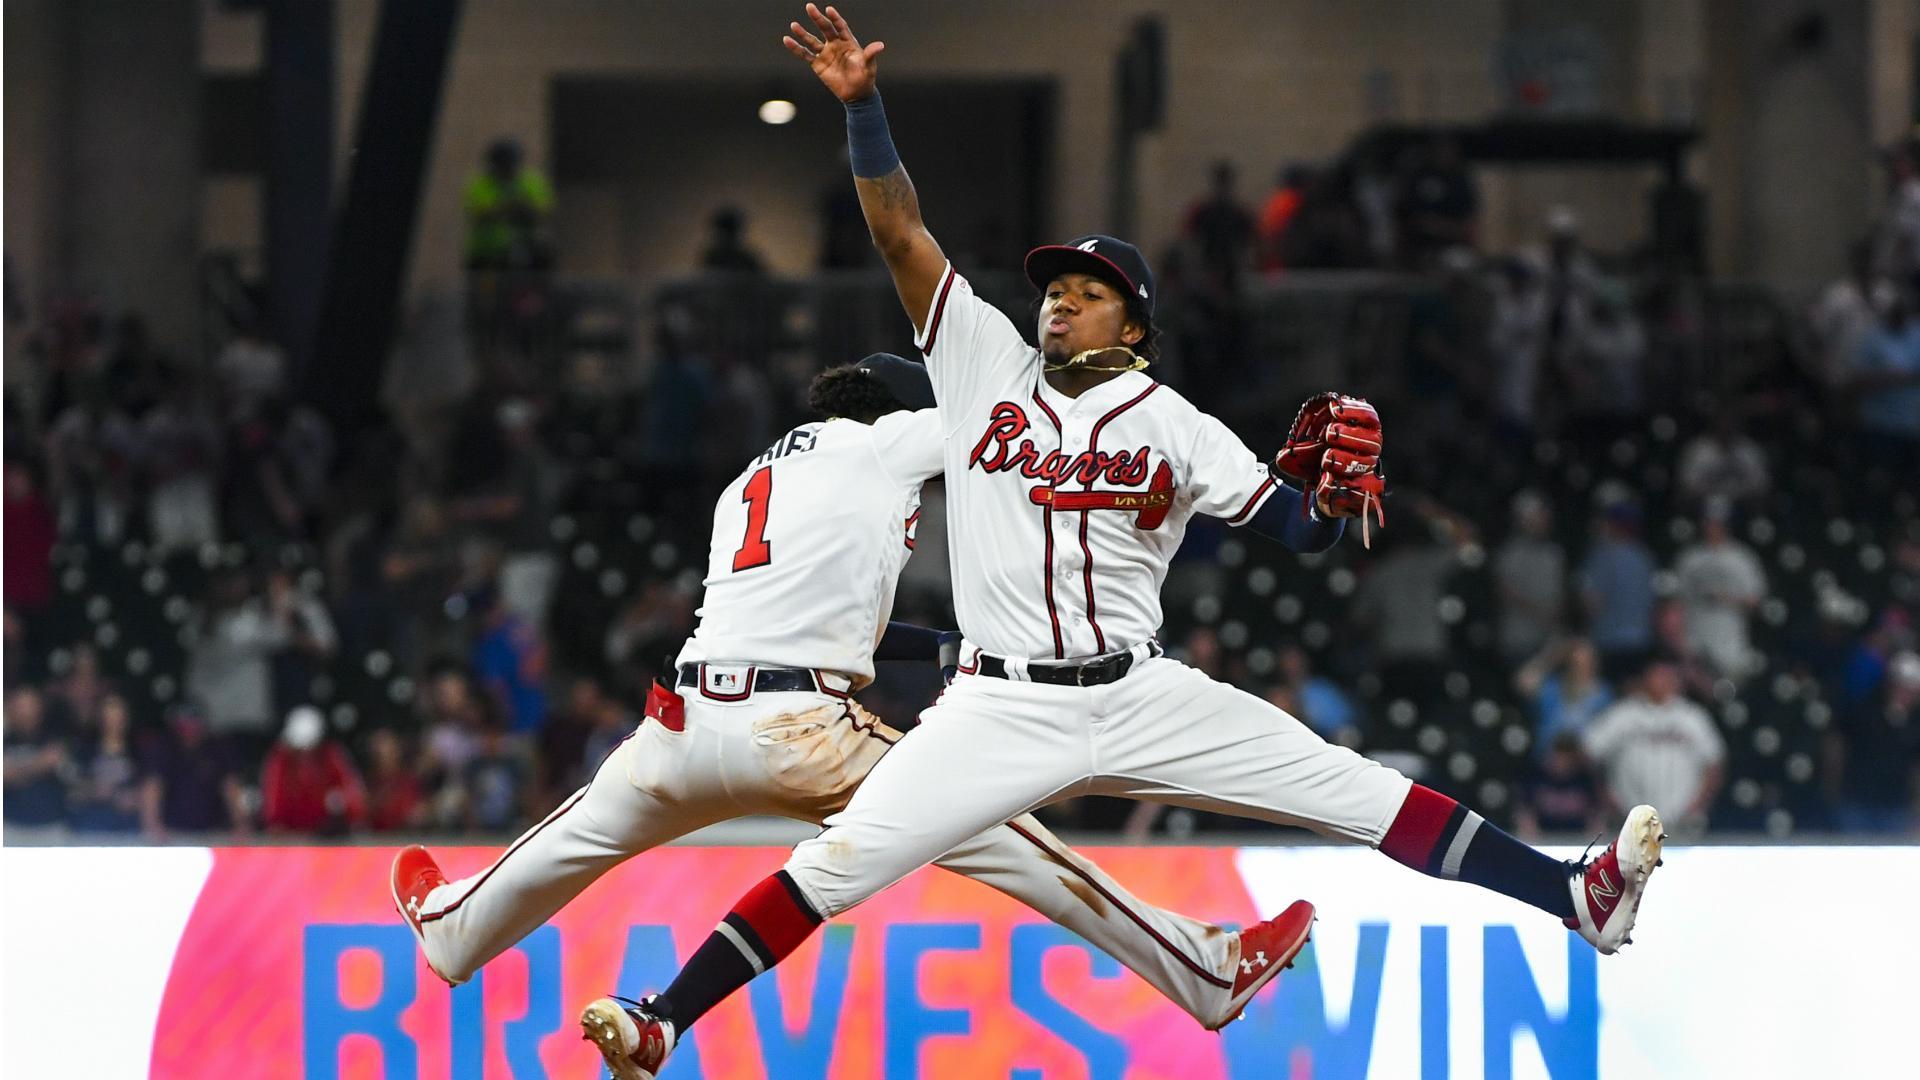 Ronald Acuna Jr. homers from one knee, and the other coolest